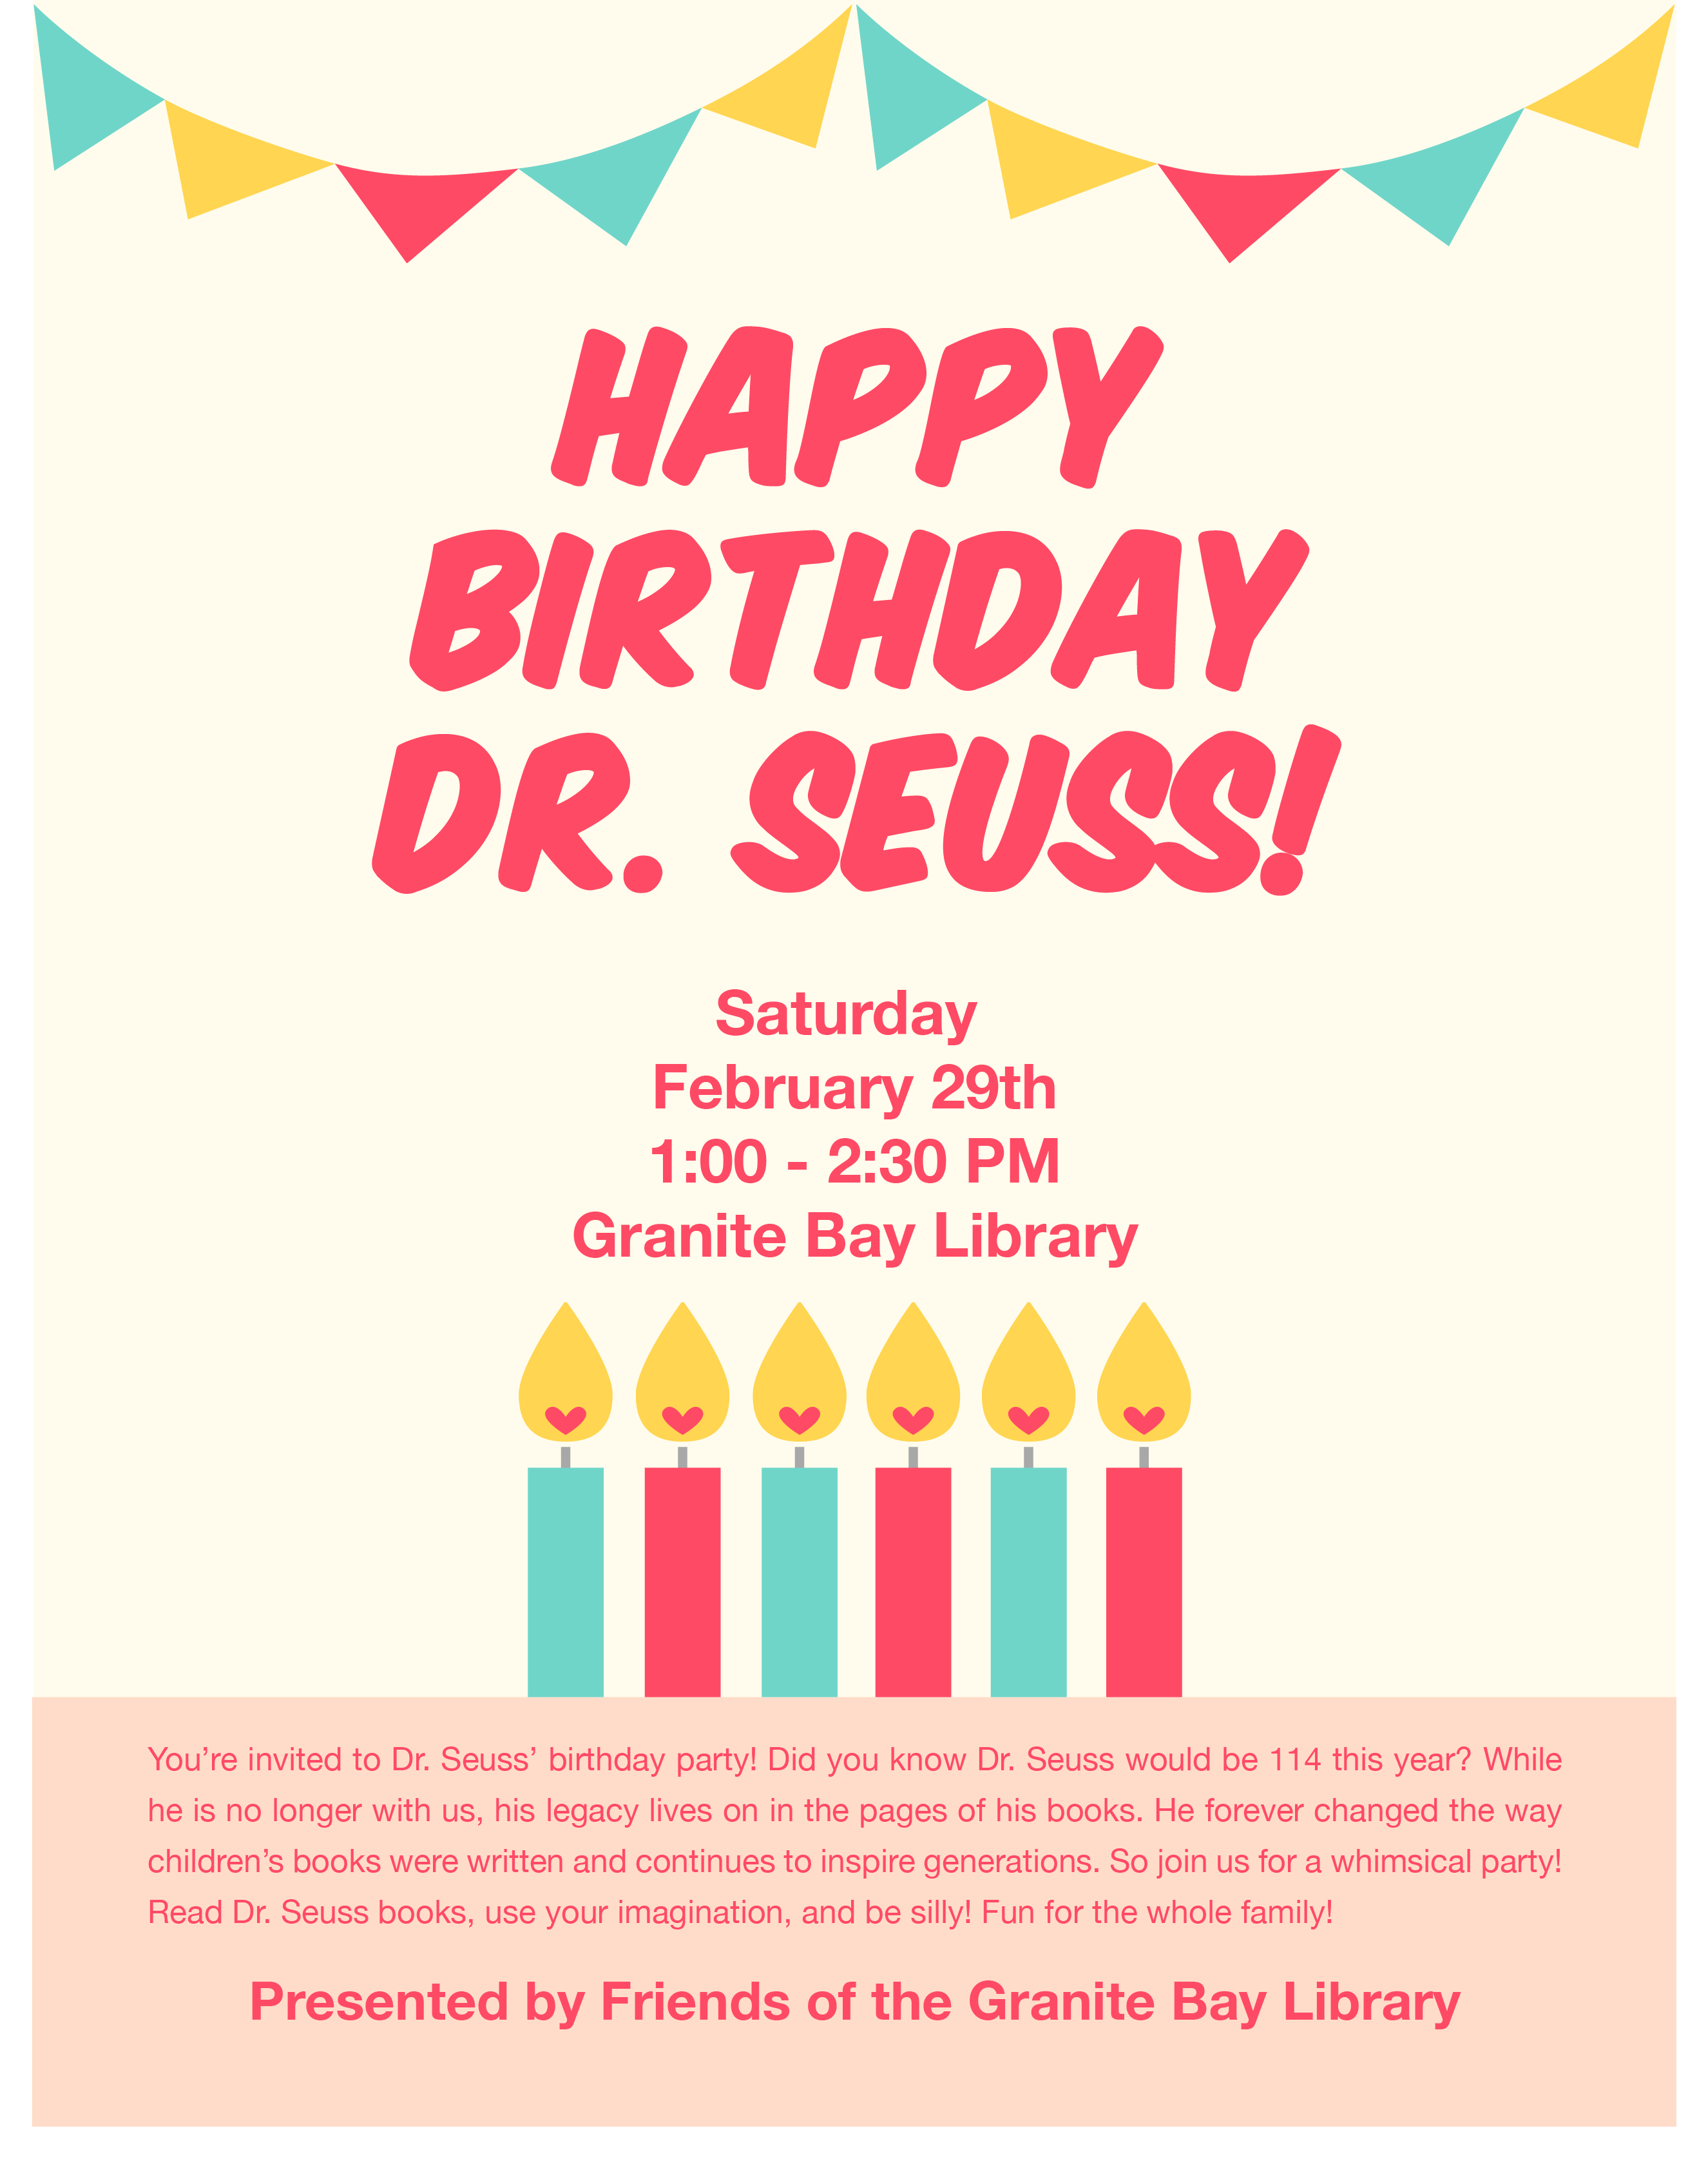 dr-seuss-birthday-party-sat-feb-29th-2020-friends-of-the-granite-bay-library